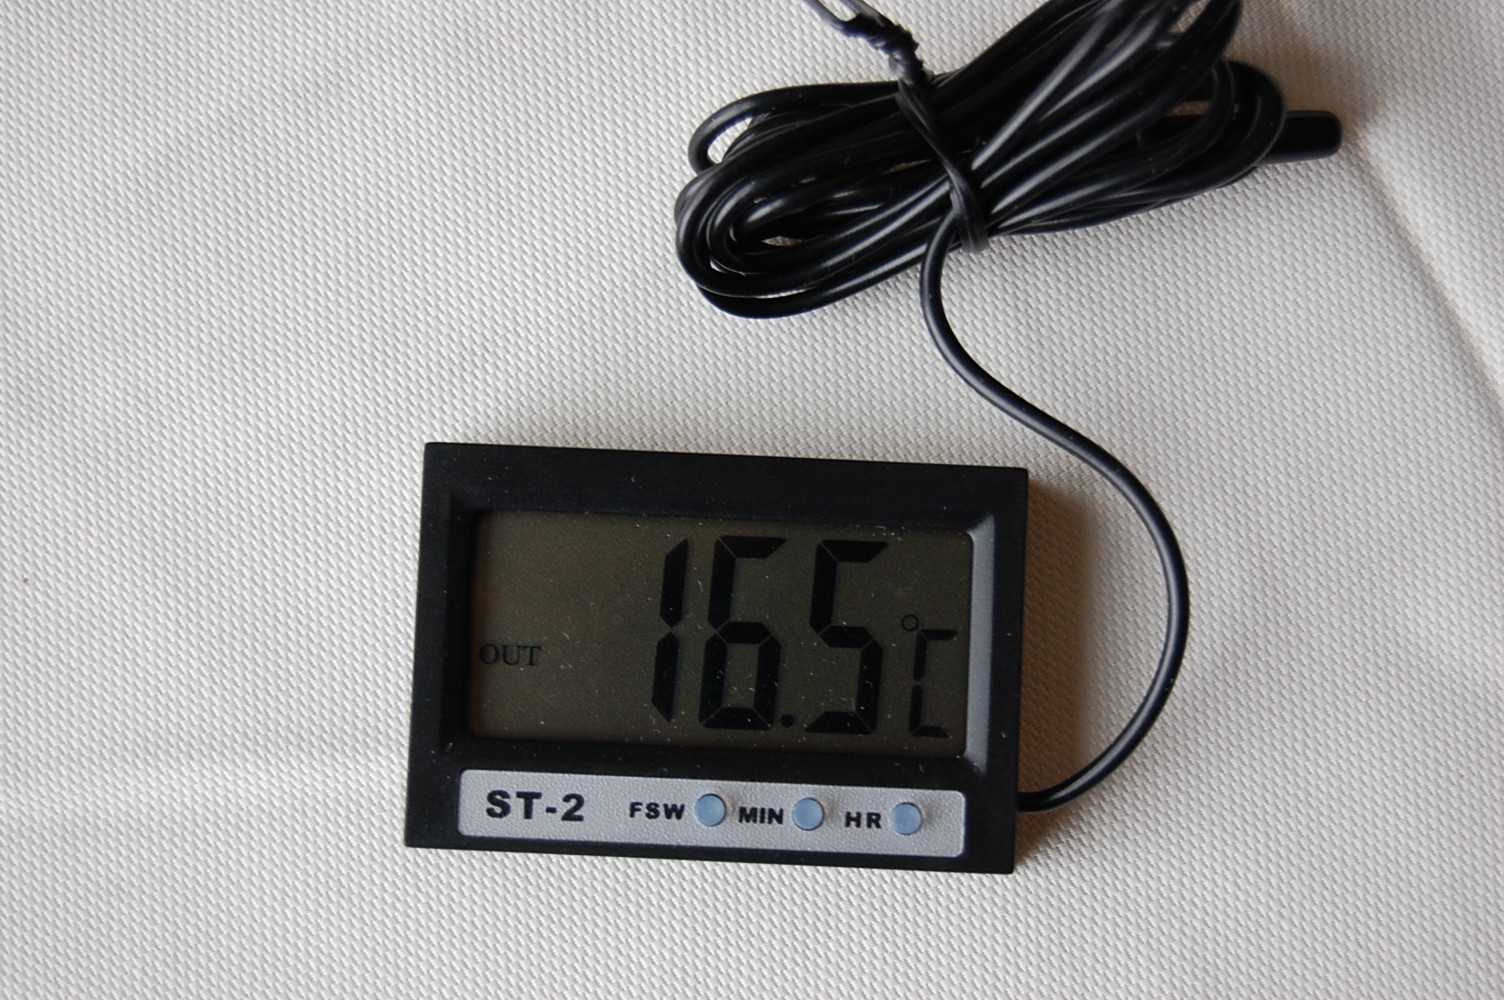 ST2 Dual Digital Thermometer LCD Display with Sensor